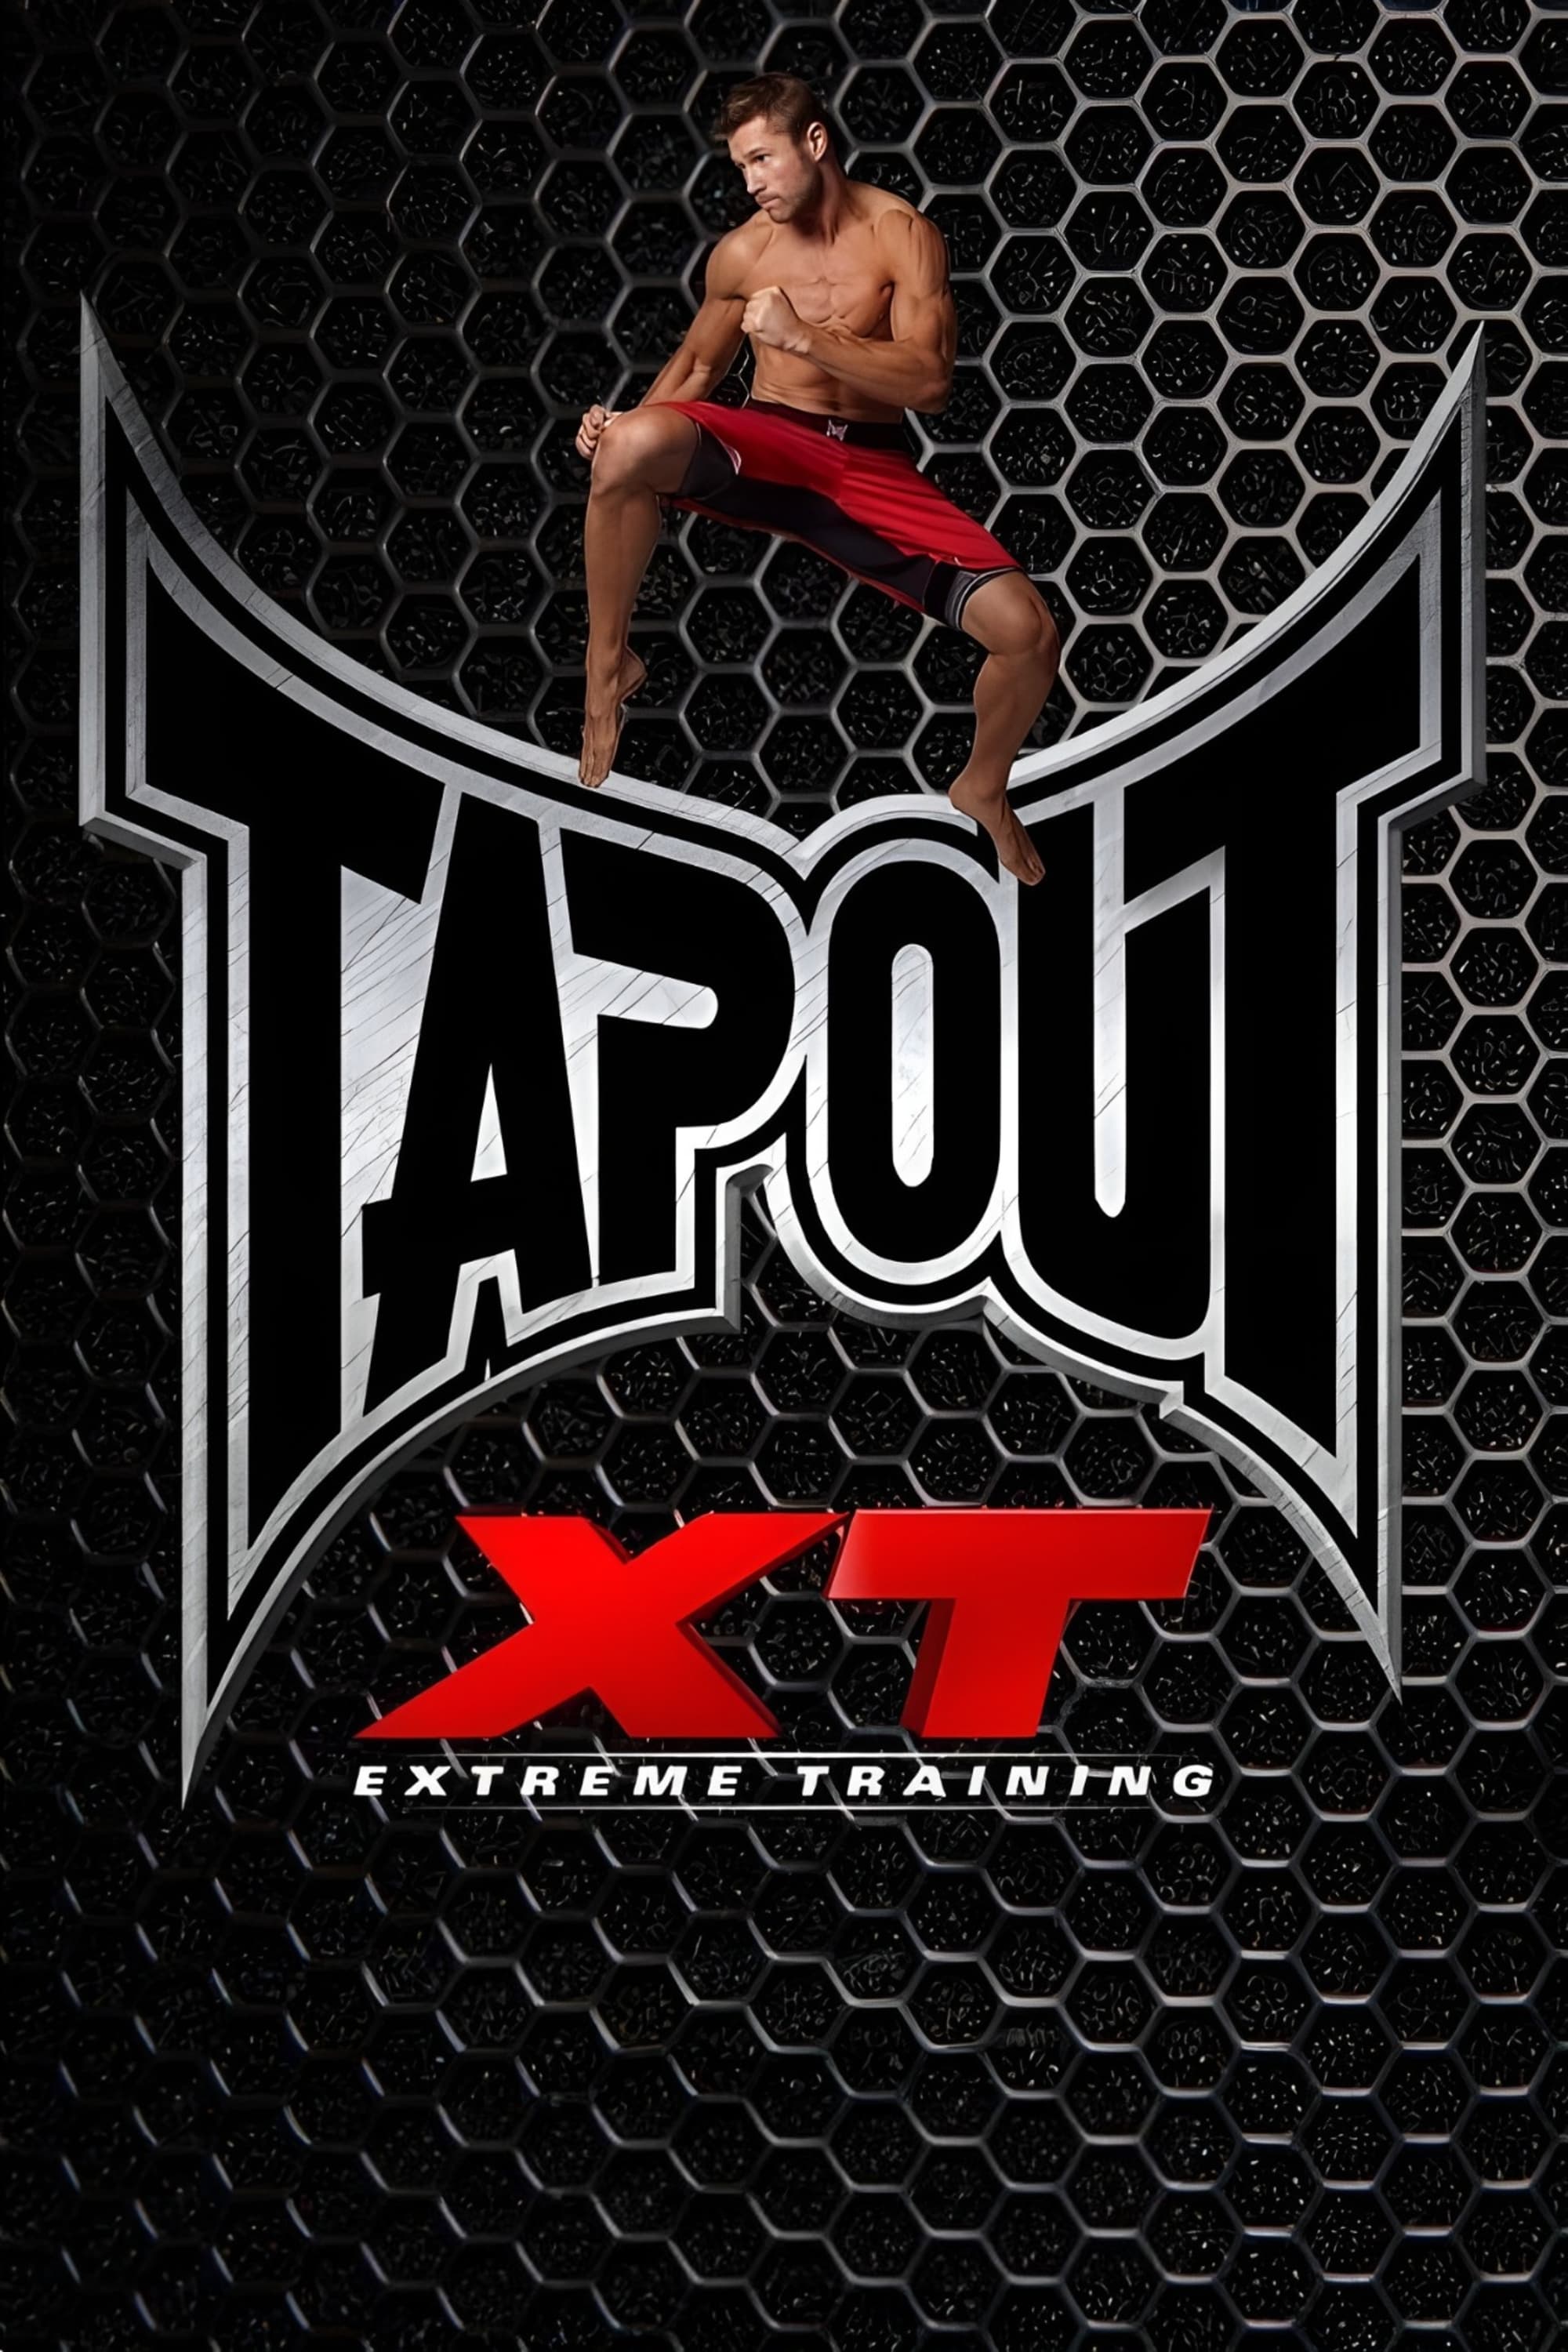 Tapout XT - 8 Pack Abs